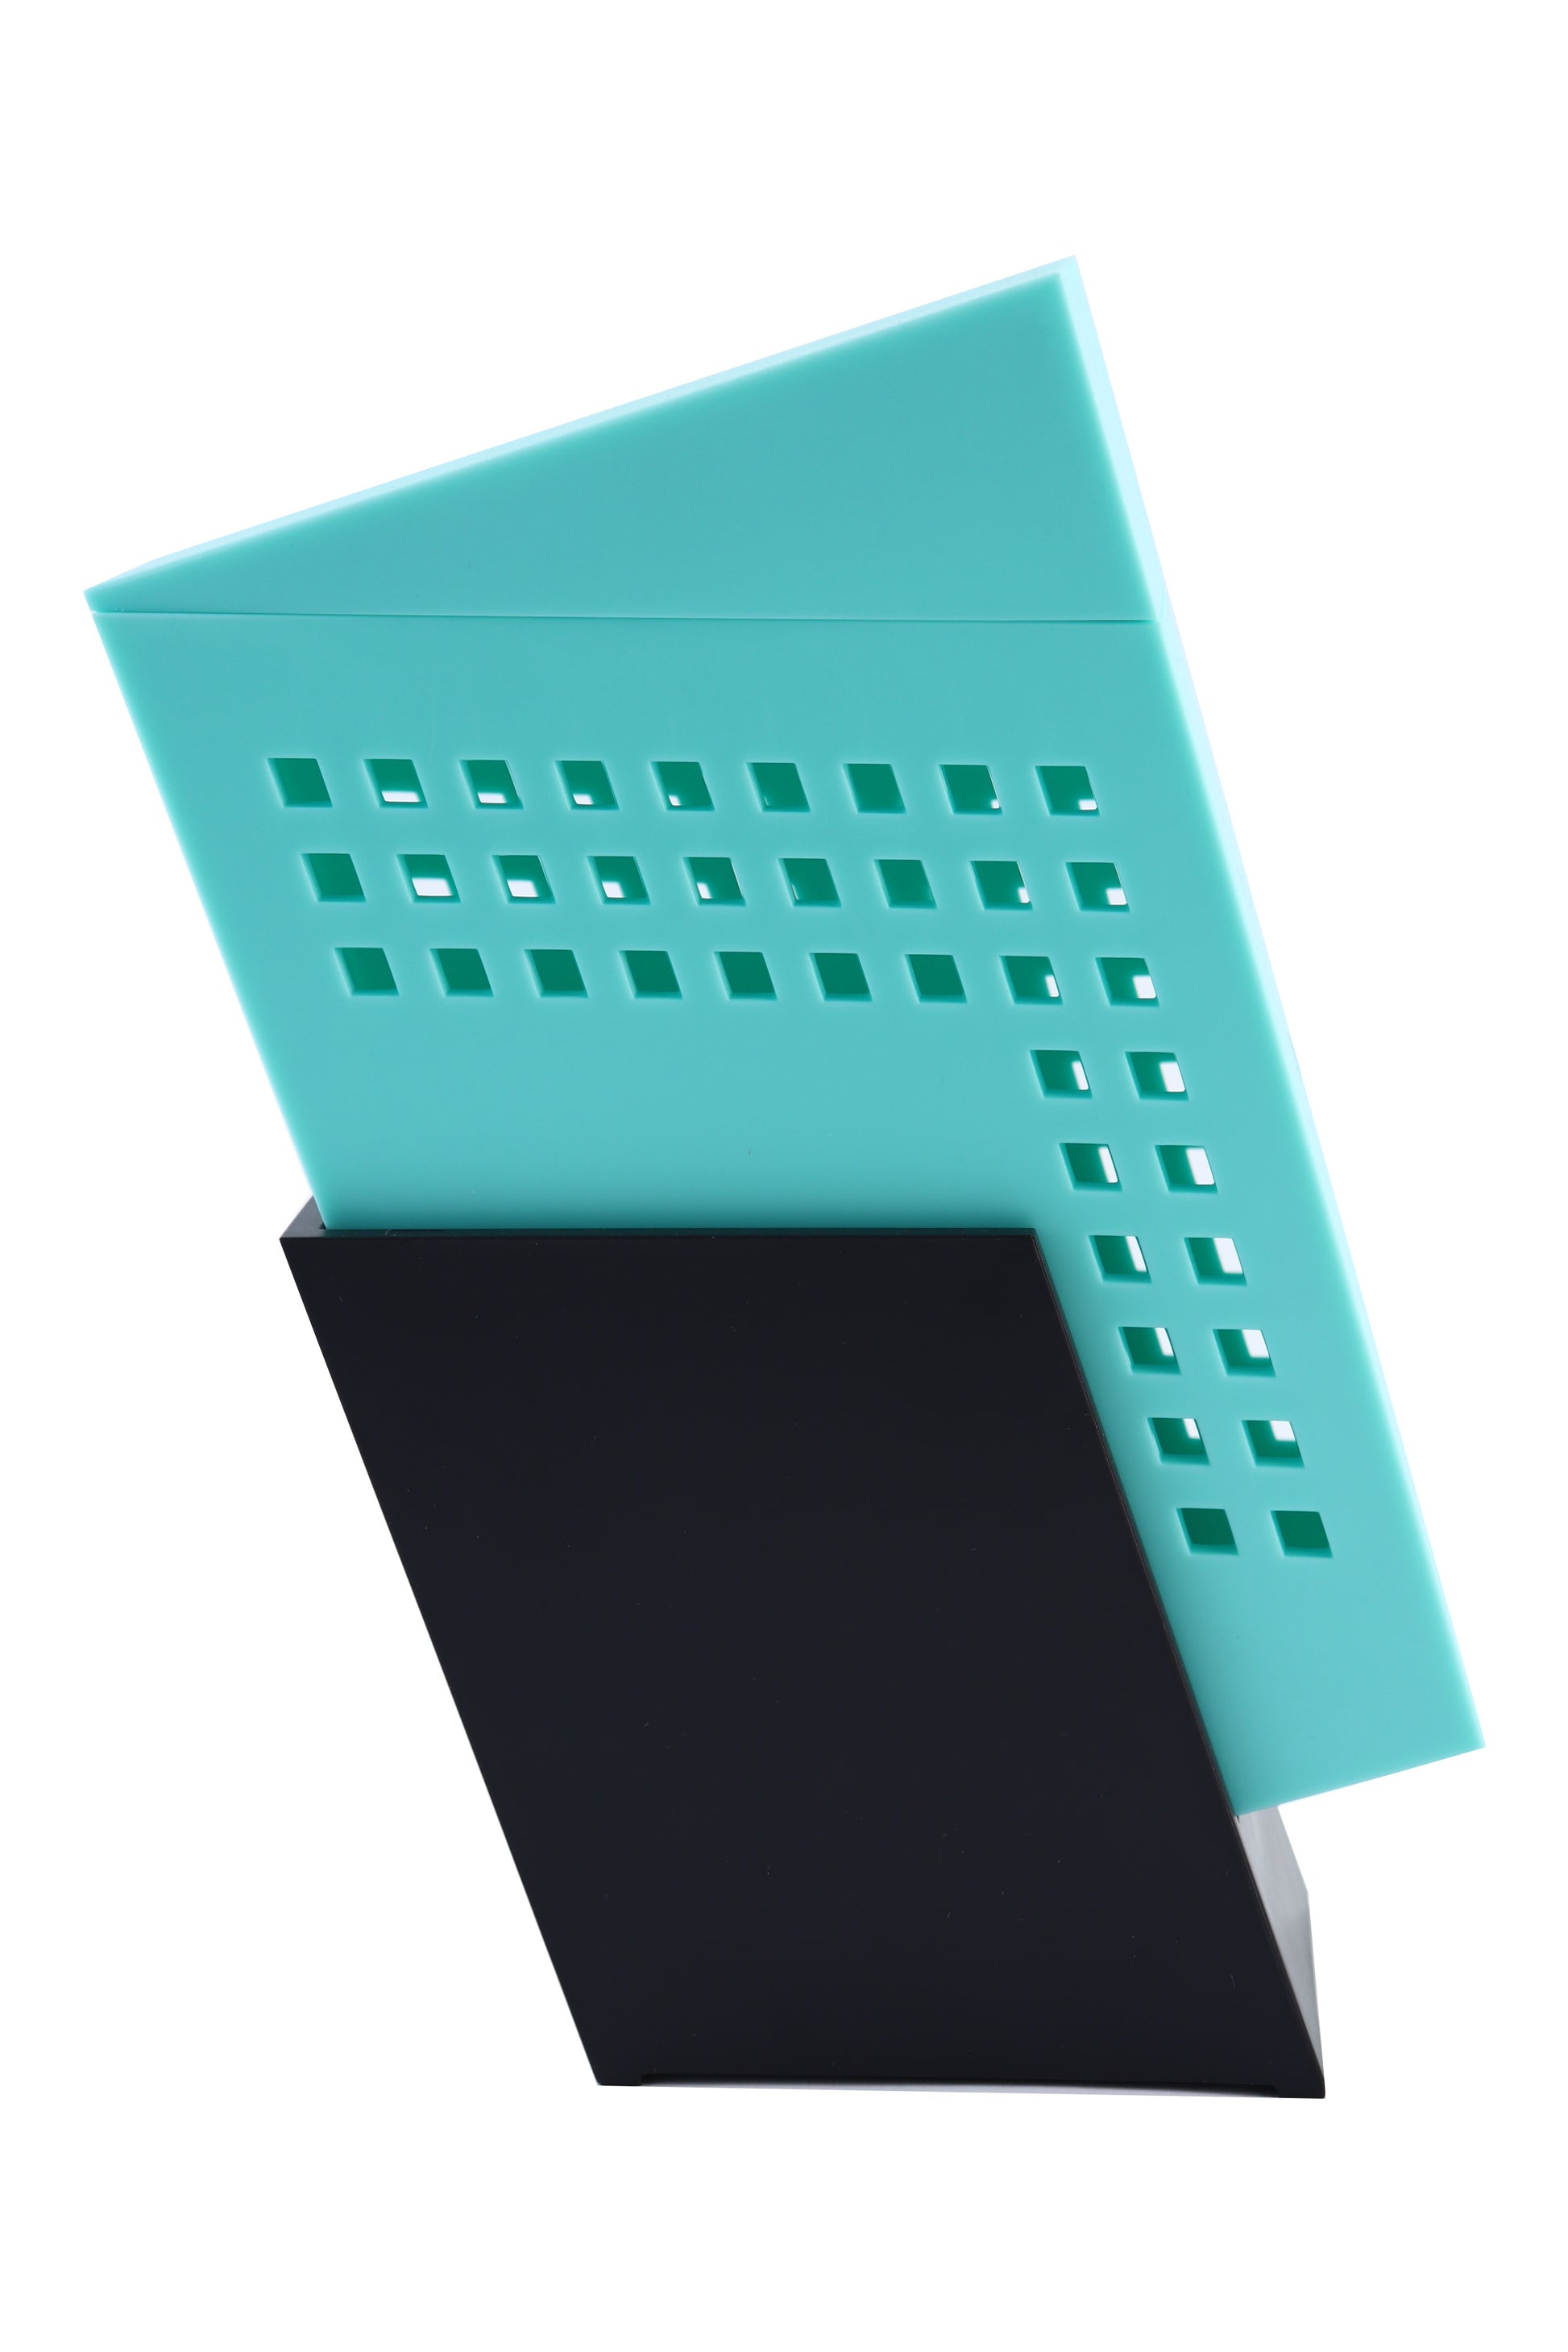 Zojila.com : Icaria Toothbrush Holder : Polystyrene Turquoise & Black Toothbrush holder with Closed Lid: Home & Bath Side view